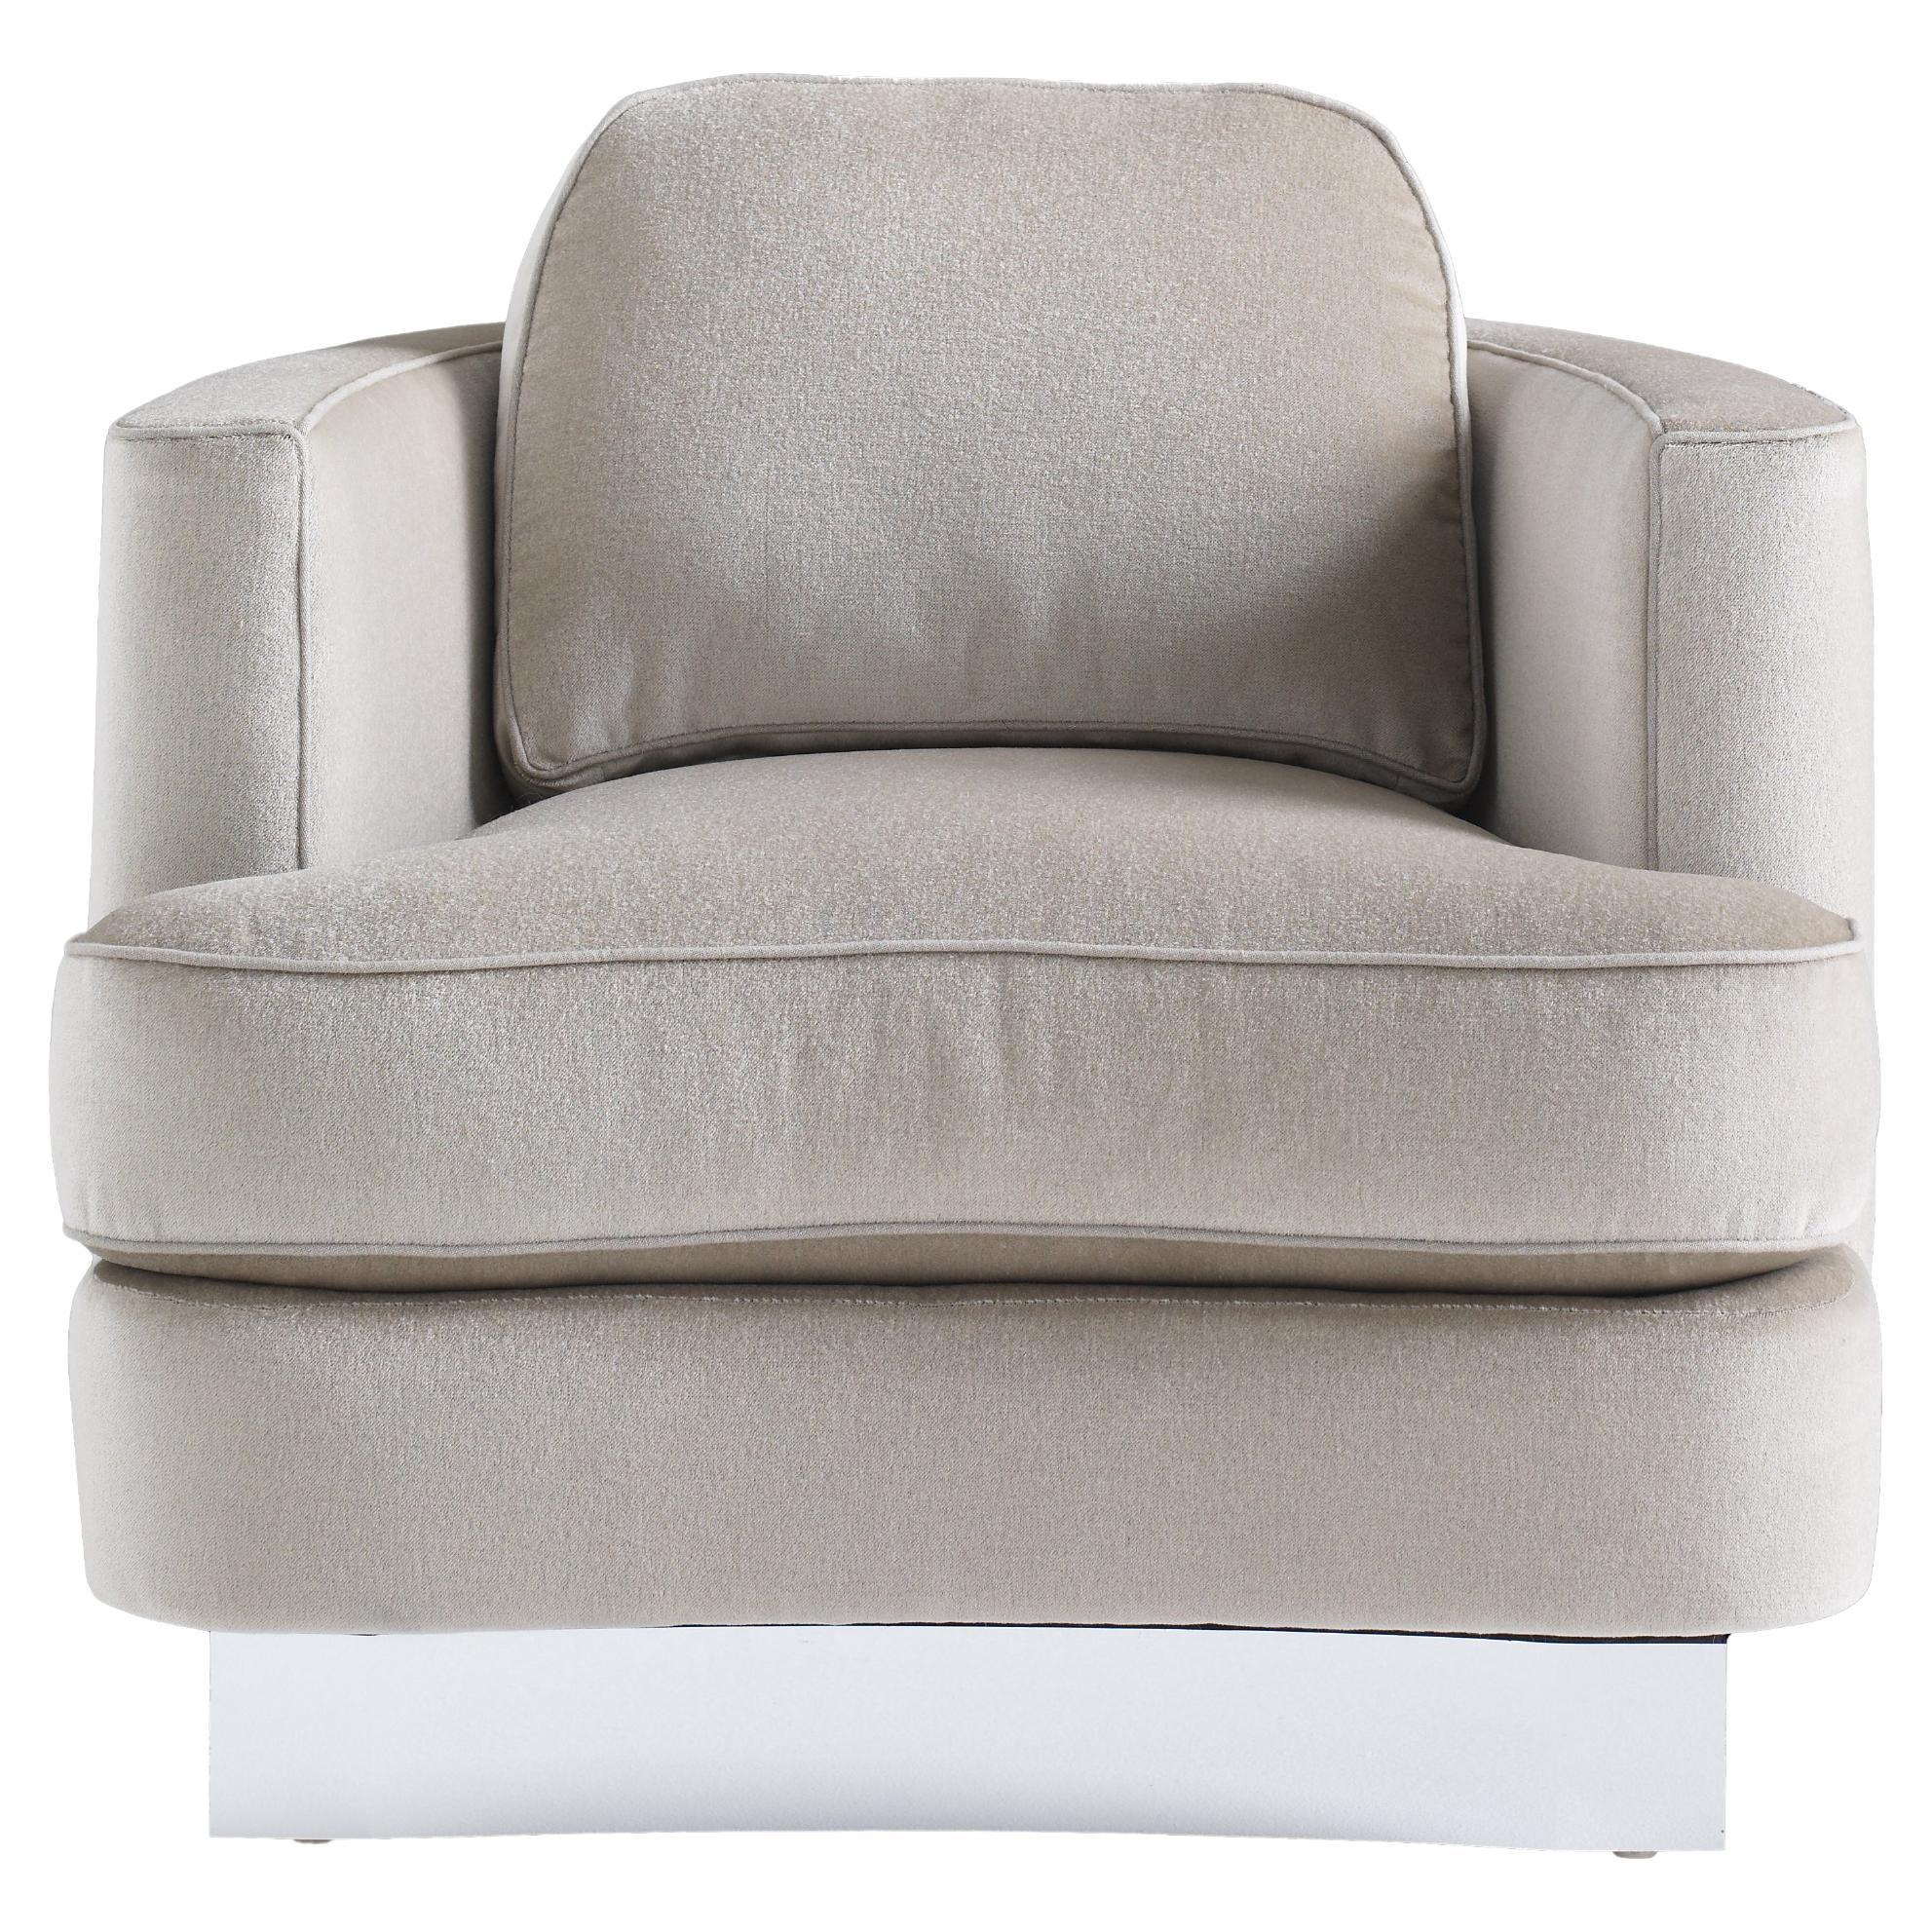 Cubist Curve Lounge Chair, upholstered swivel chair For Sale